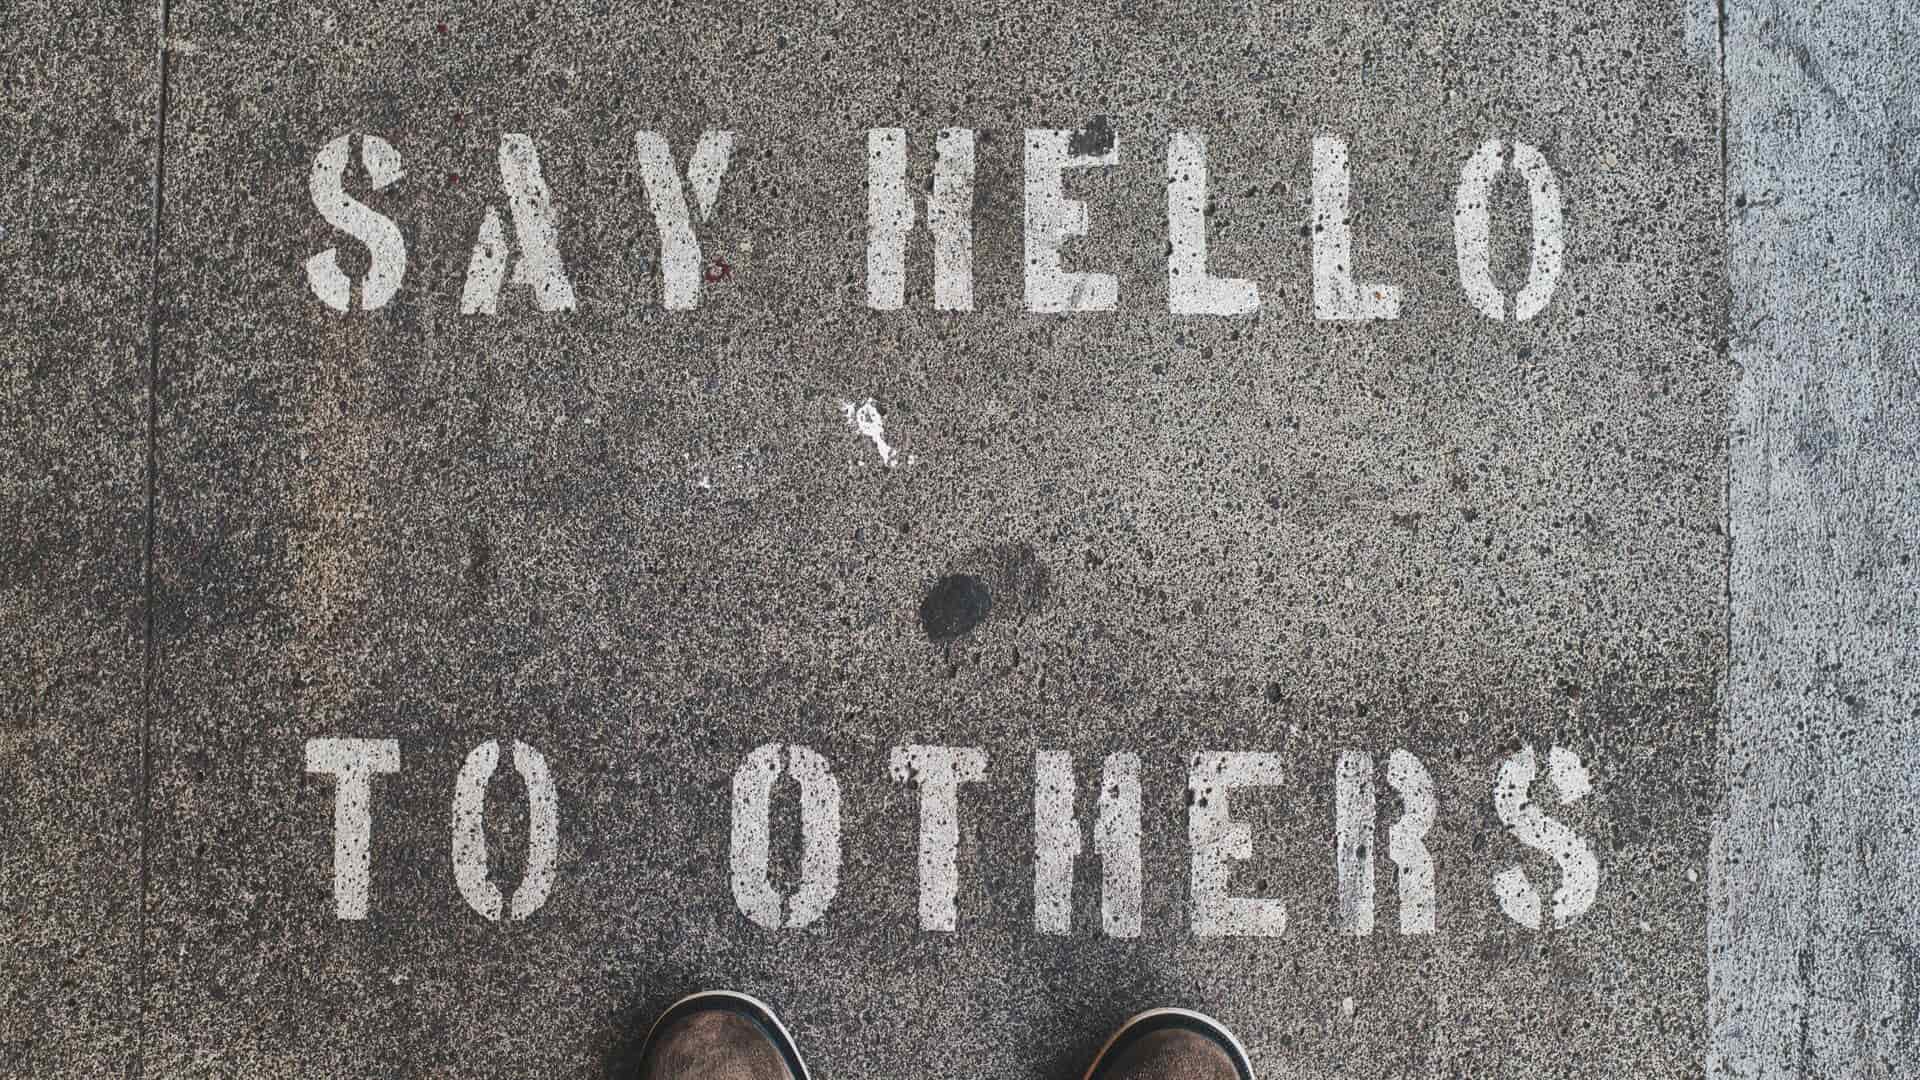 concrete floor with phrase "say hello to others"